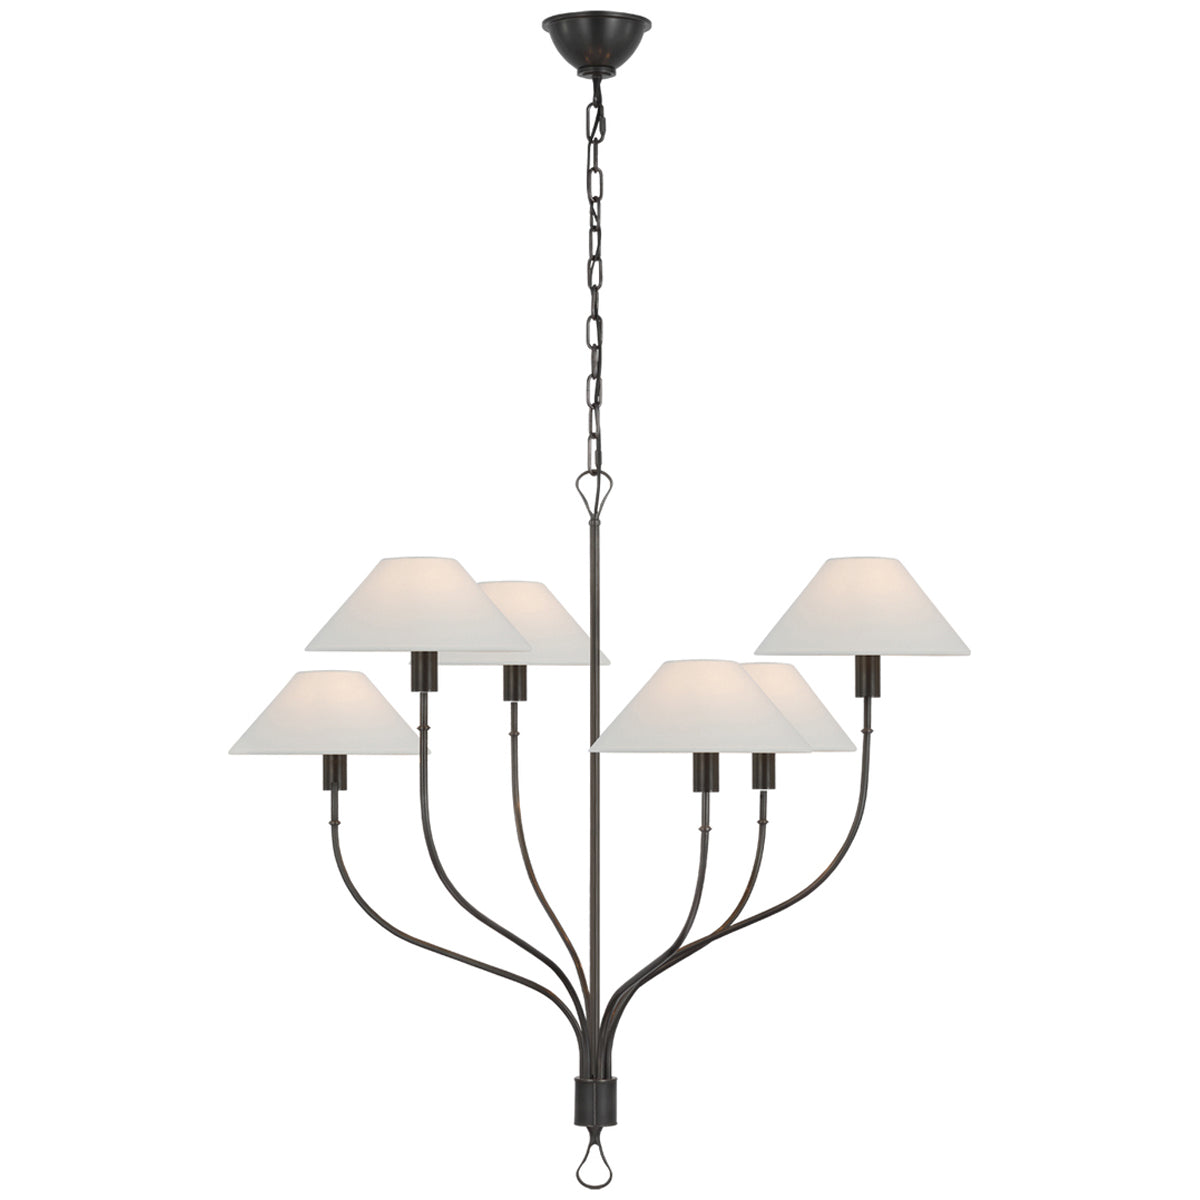 Visual Comfort Griffin Large Staggered Tail Chandelier